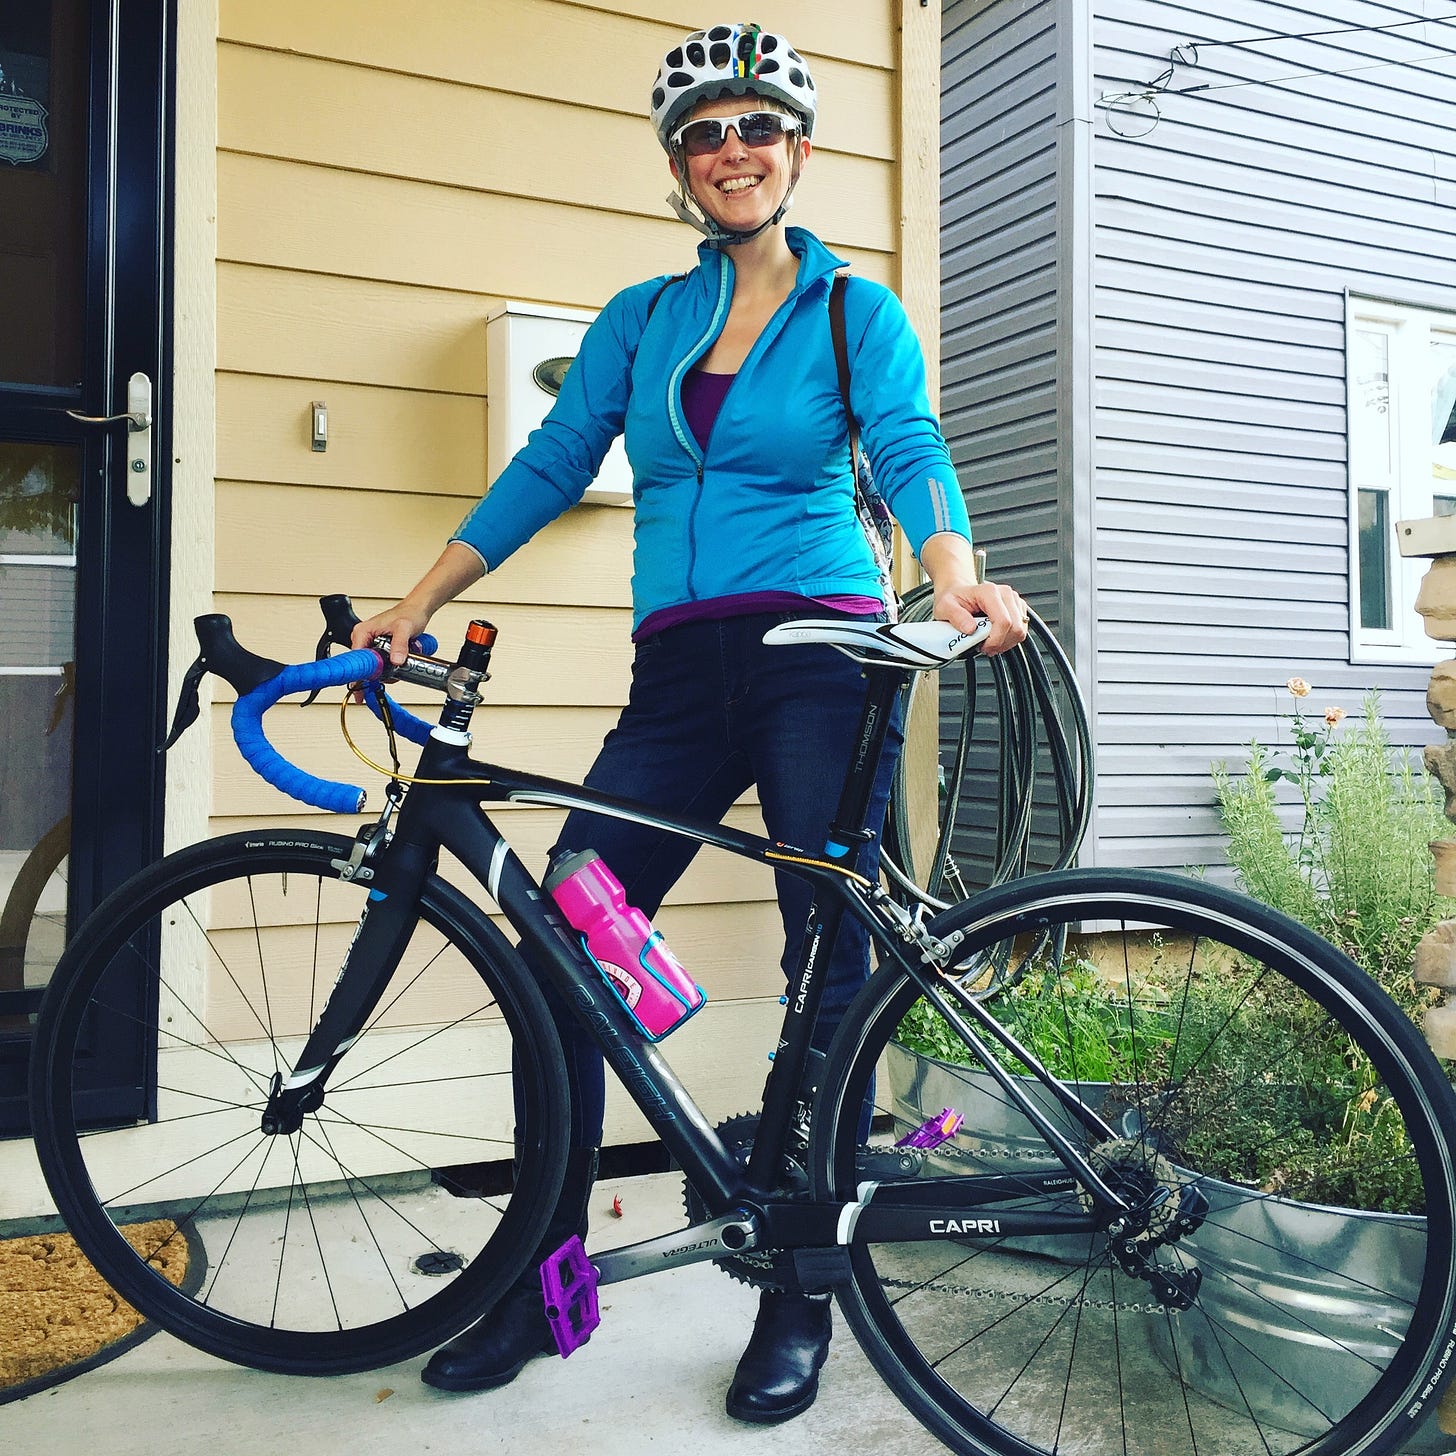 Jessie matchy-matchy in black and blue with her black and blue road bike